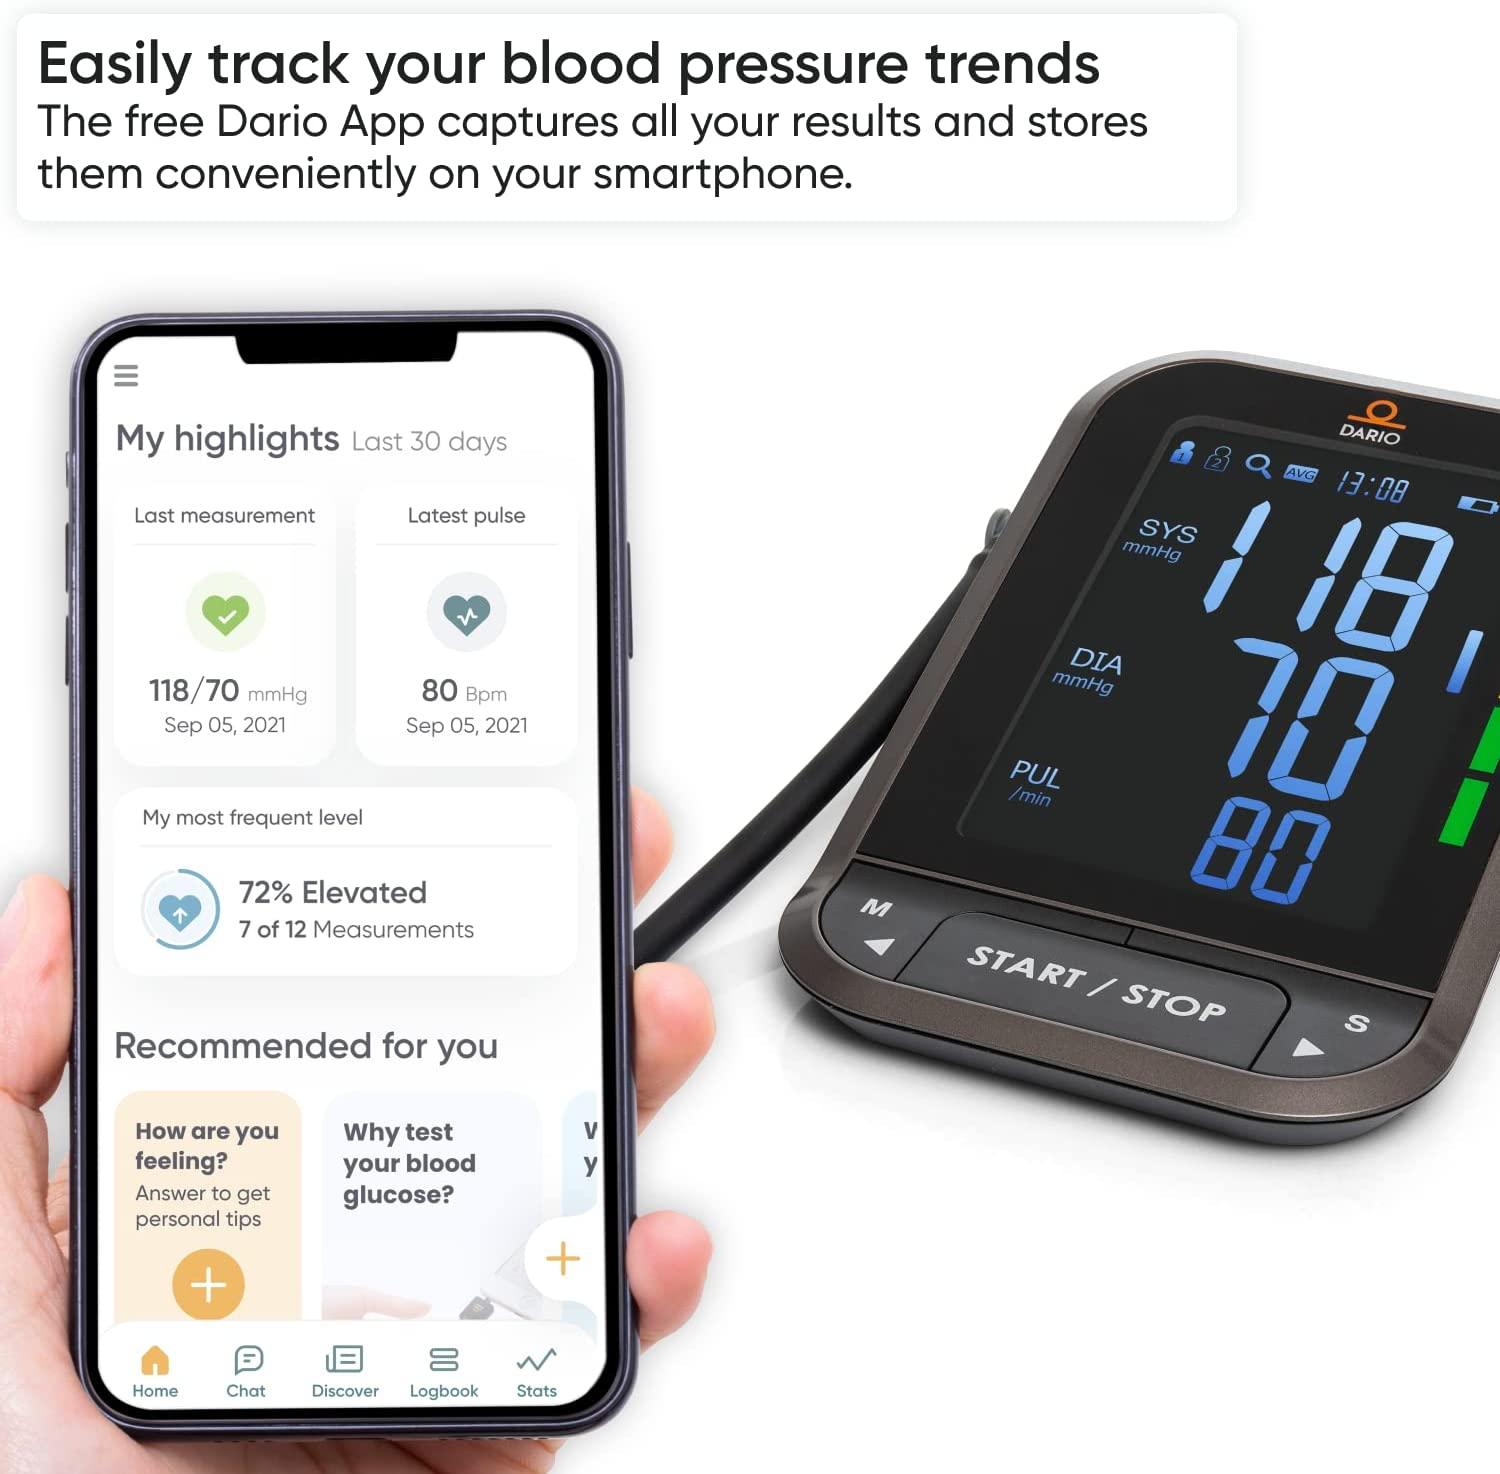 Dario Blood Pressure Monitor Gen2 - Automatic Digital BP Machine with Large  Backlit Display Upper Arm Meter and Large Cuff for Accurate Home Use, with  Carrying Case (Large 8.75-16.5 in (22-42cm))